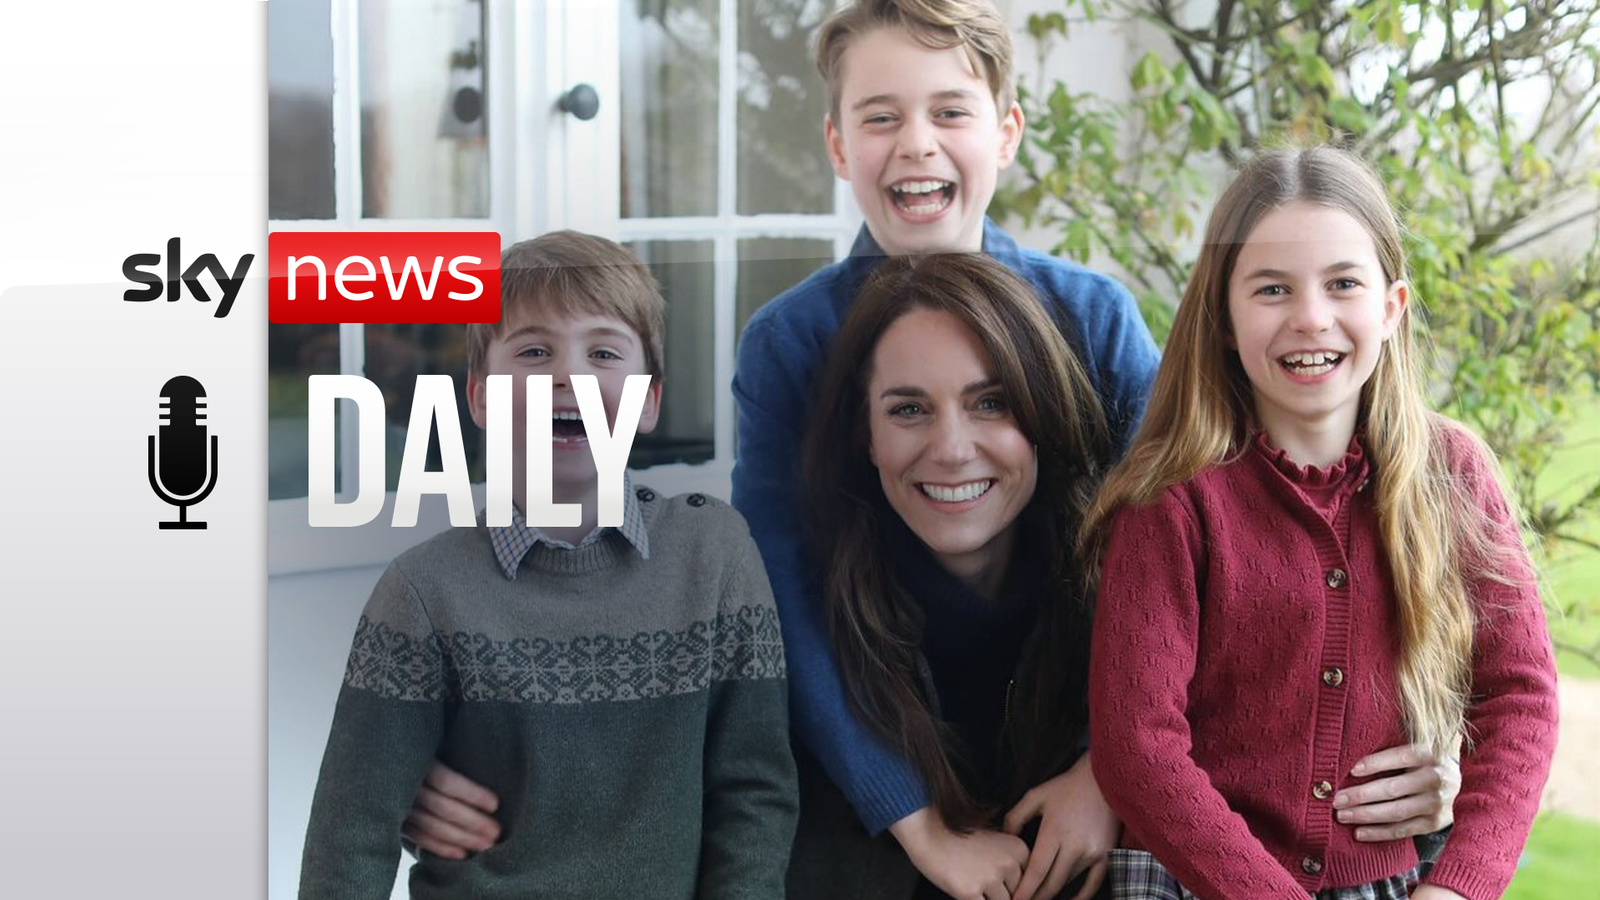 Controversy Surrounding \'Manipulated\' Photo of Kate Middleton and Children